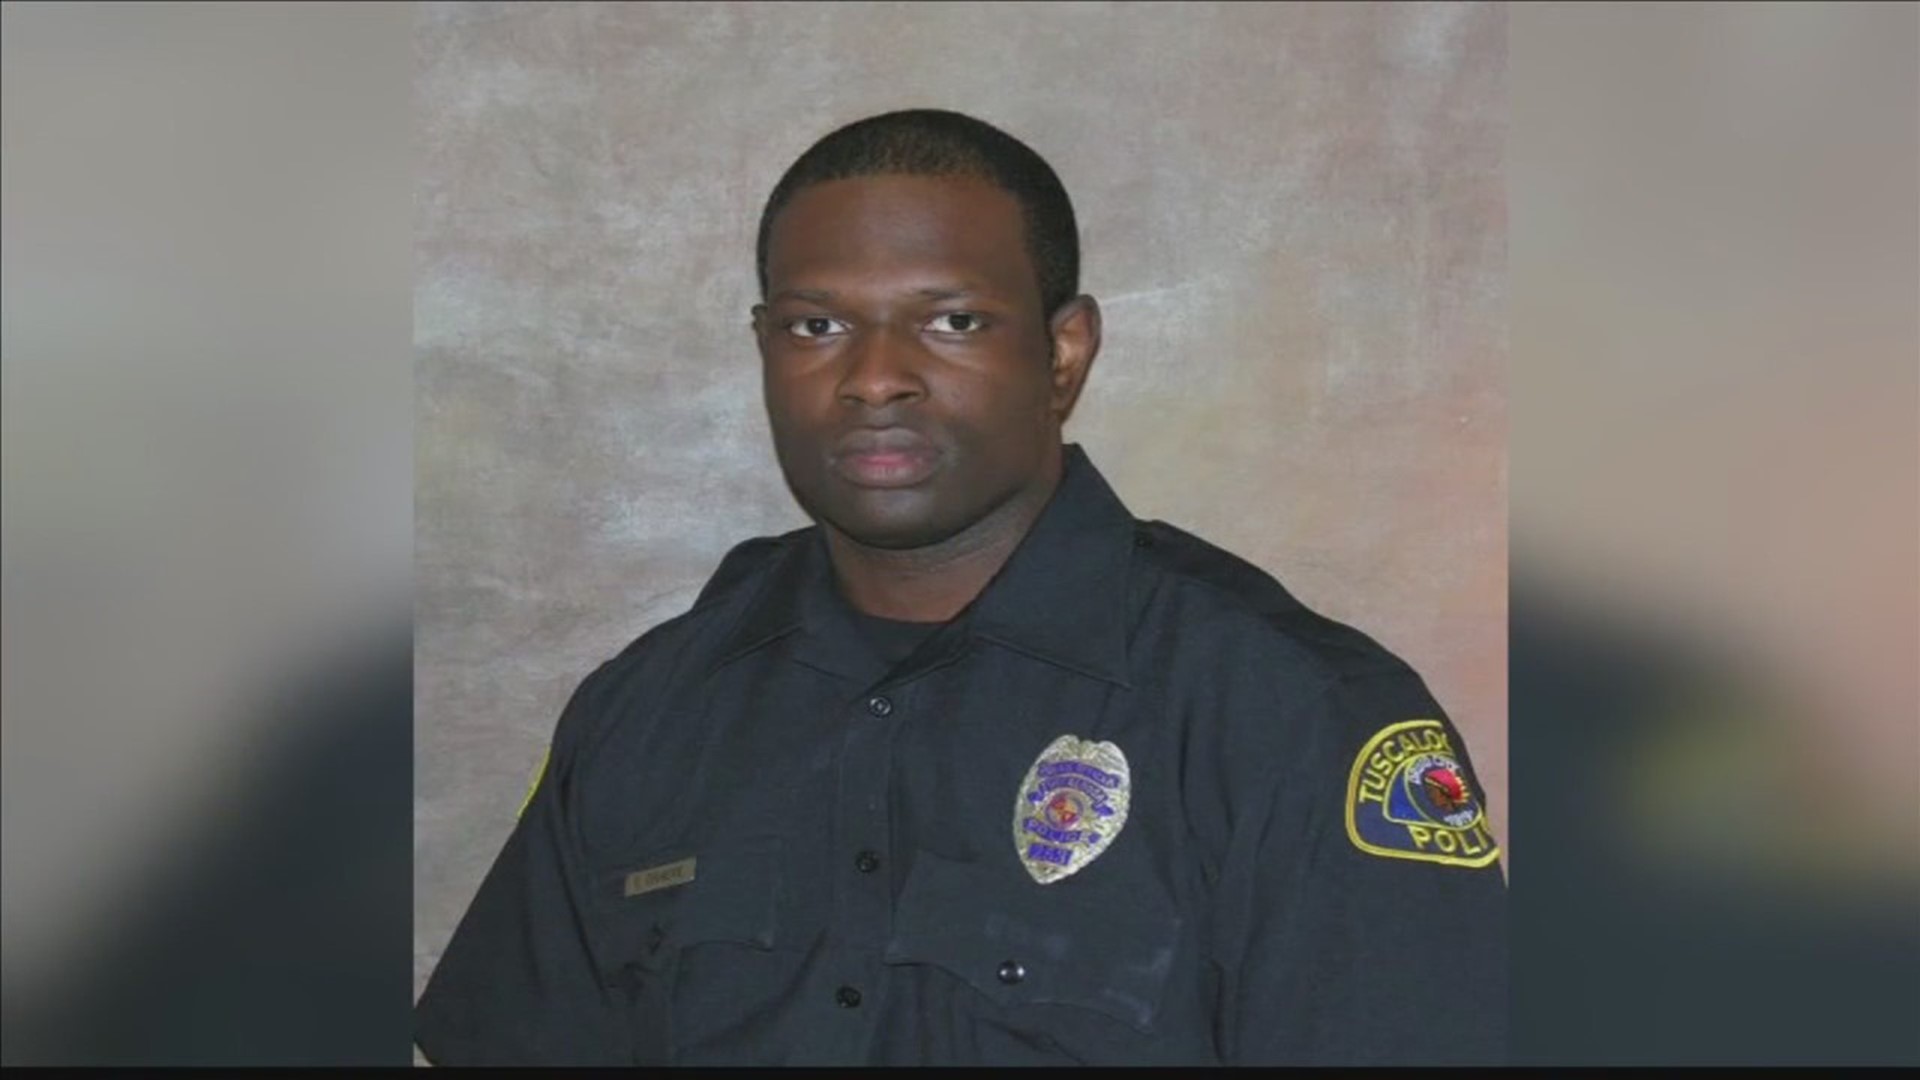 A fallen officer with the Tuscaloosa Police Department was laid to rest Sunday.